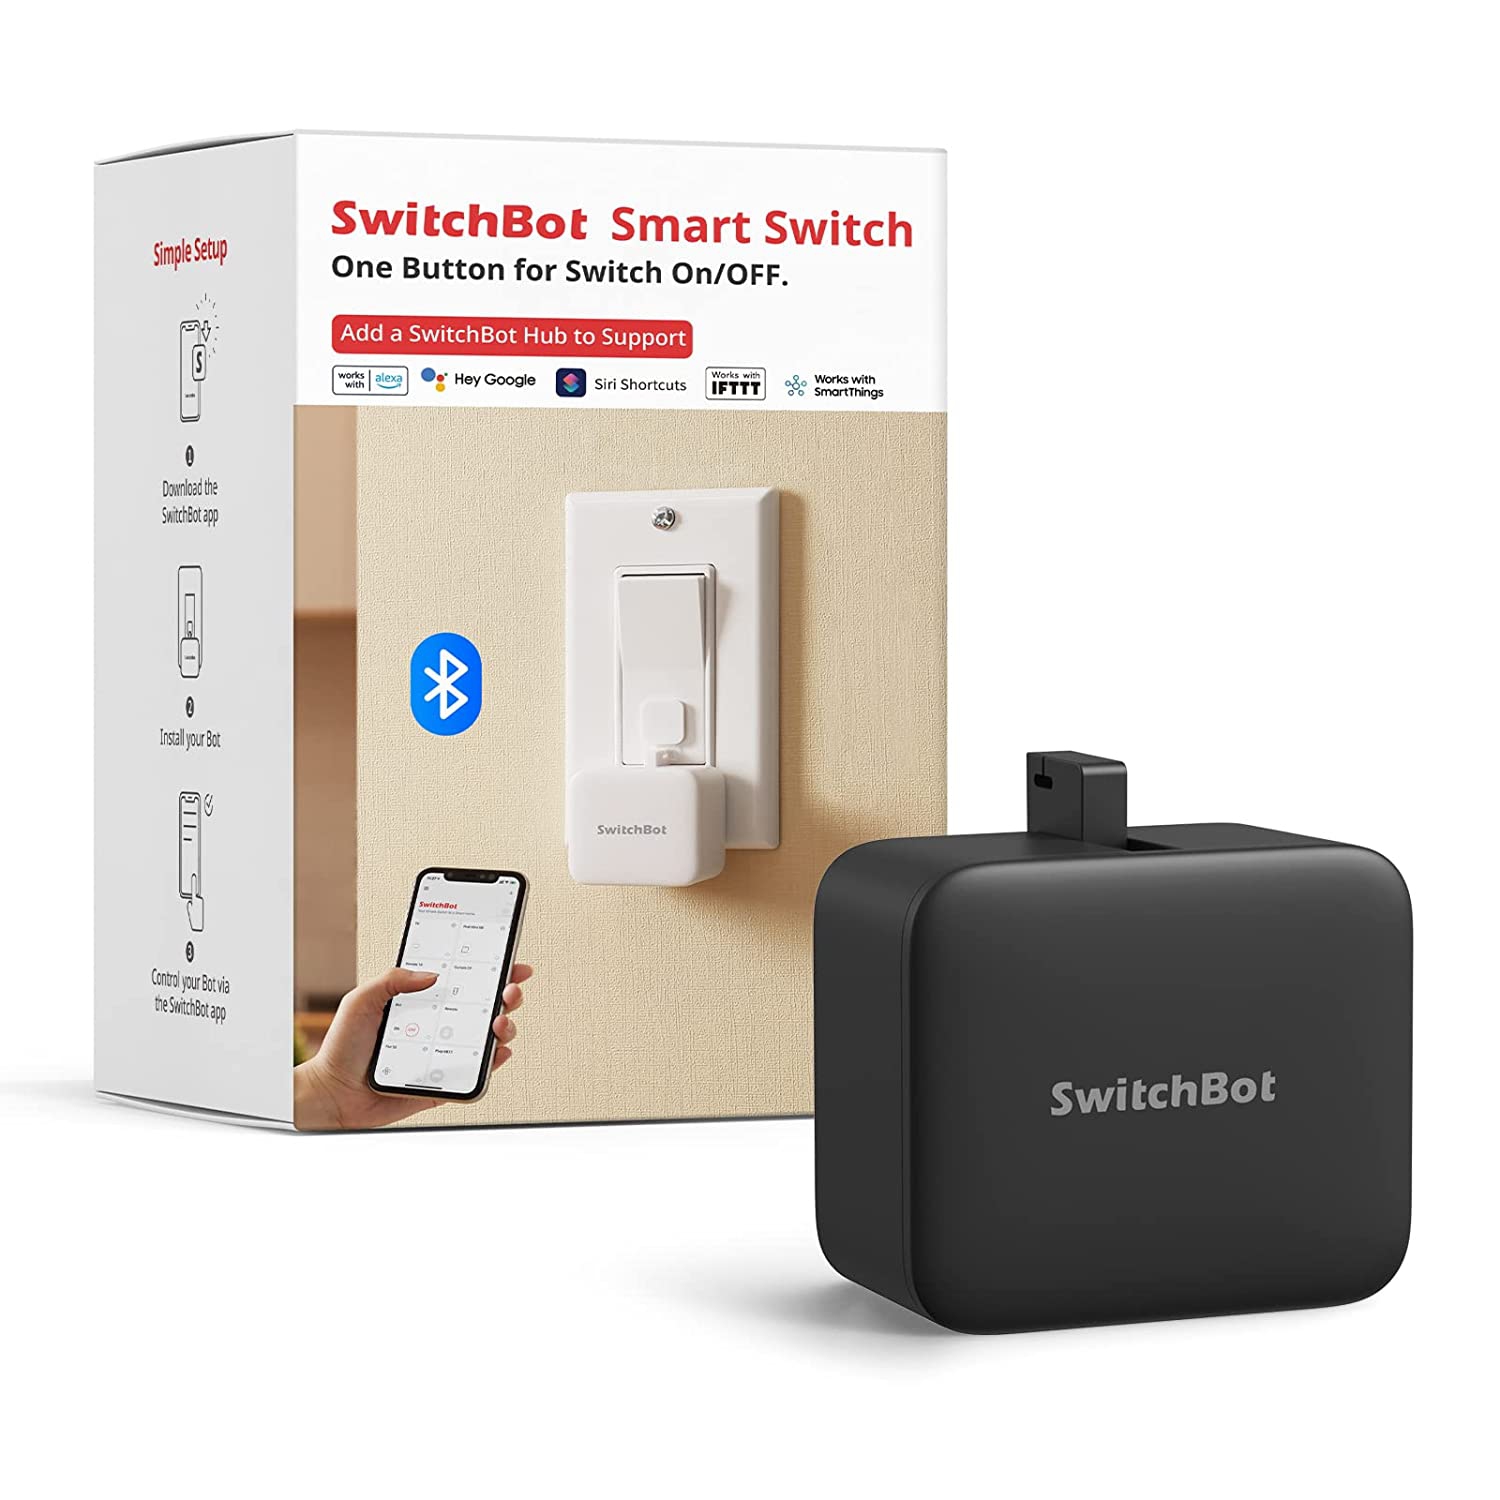 SwitchBot Bot | Smart Light Switch Button Pusher - No Wiring, Wireless App or Timer Control, Add SwitchBot Hub Mini to Make it Compatible with Alexa, Google Home, IFTTT, Black